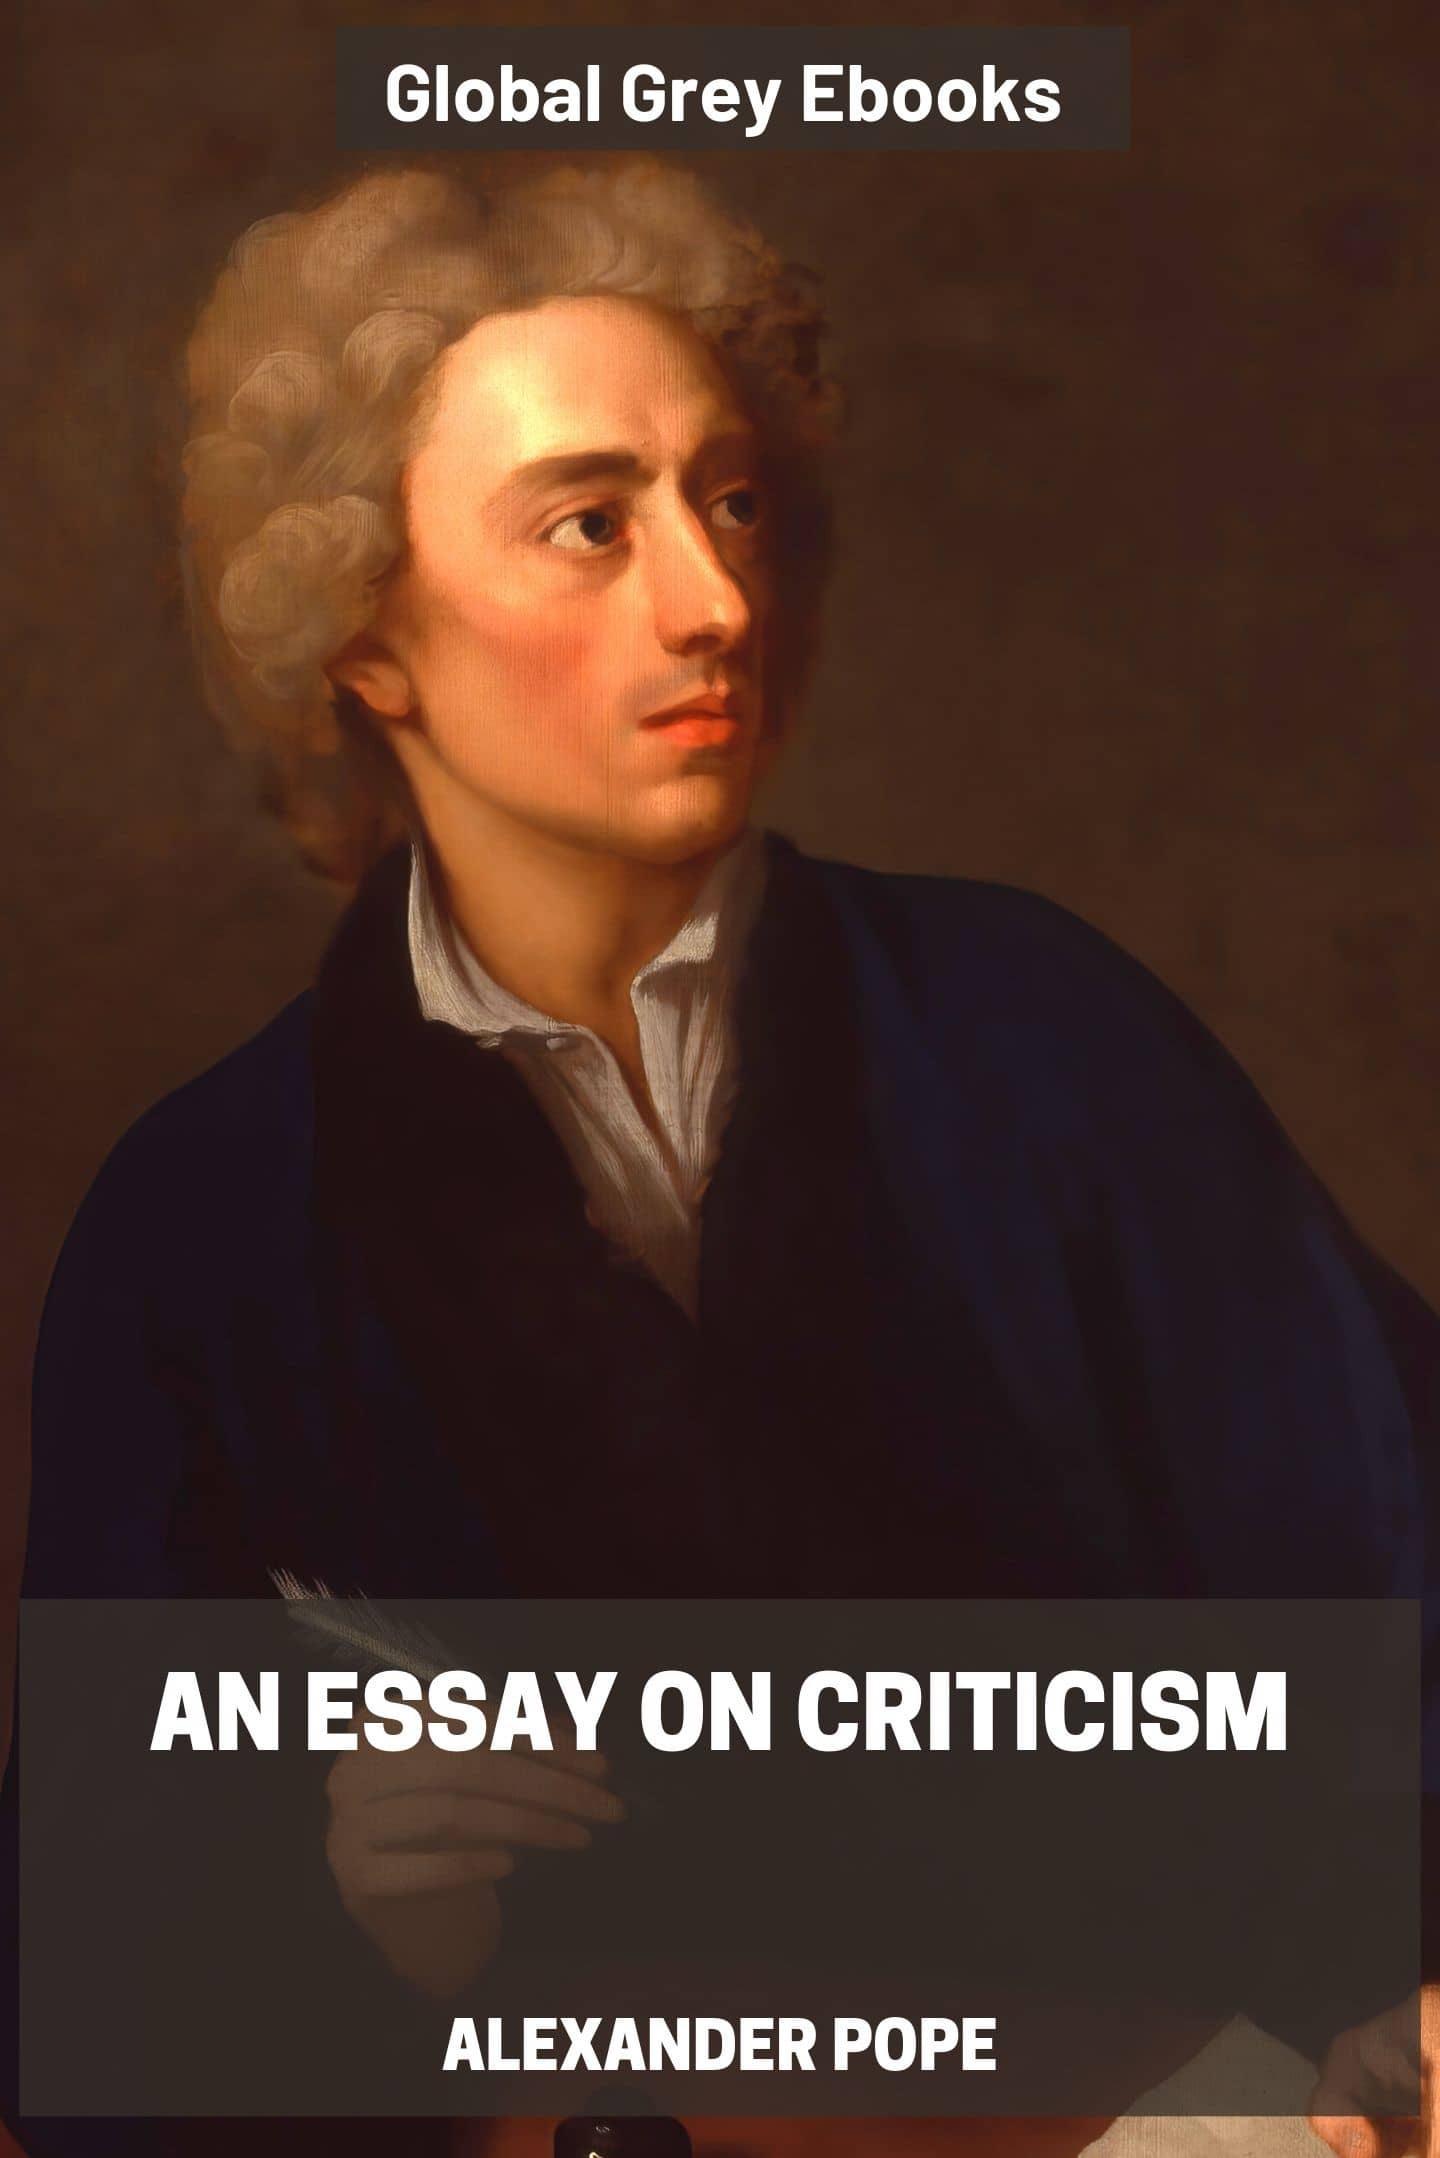 alexander pope an essay on criticism sparknotes